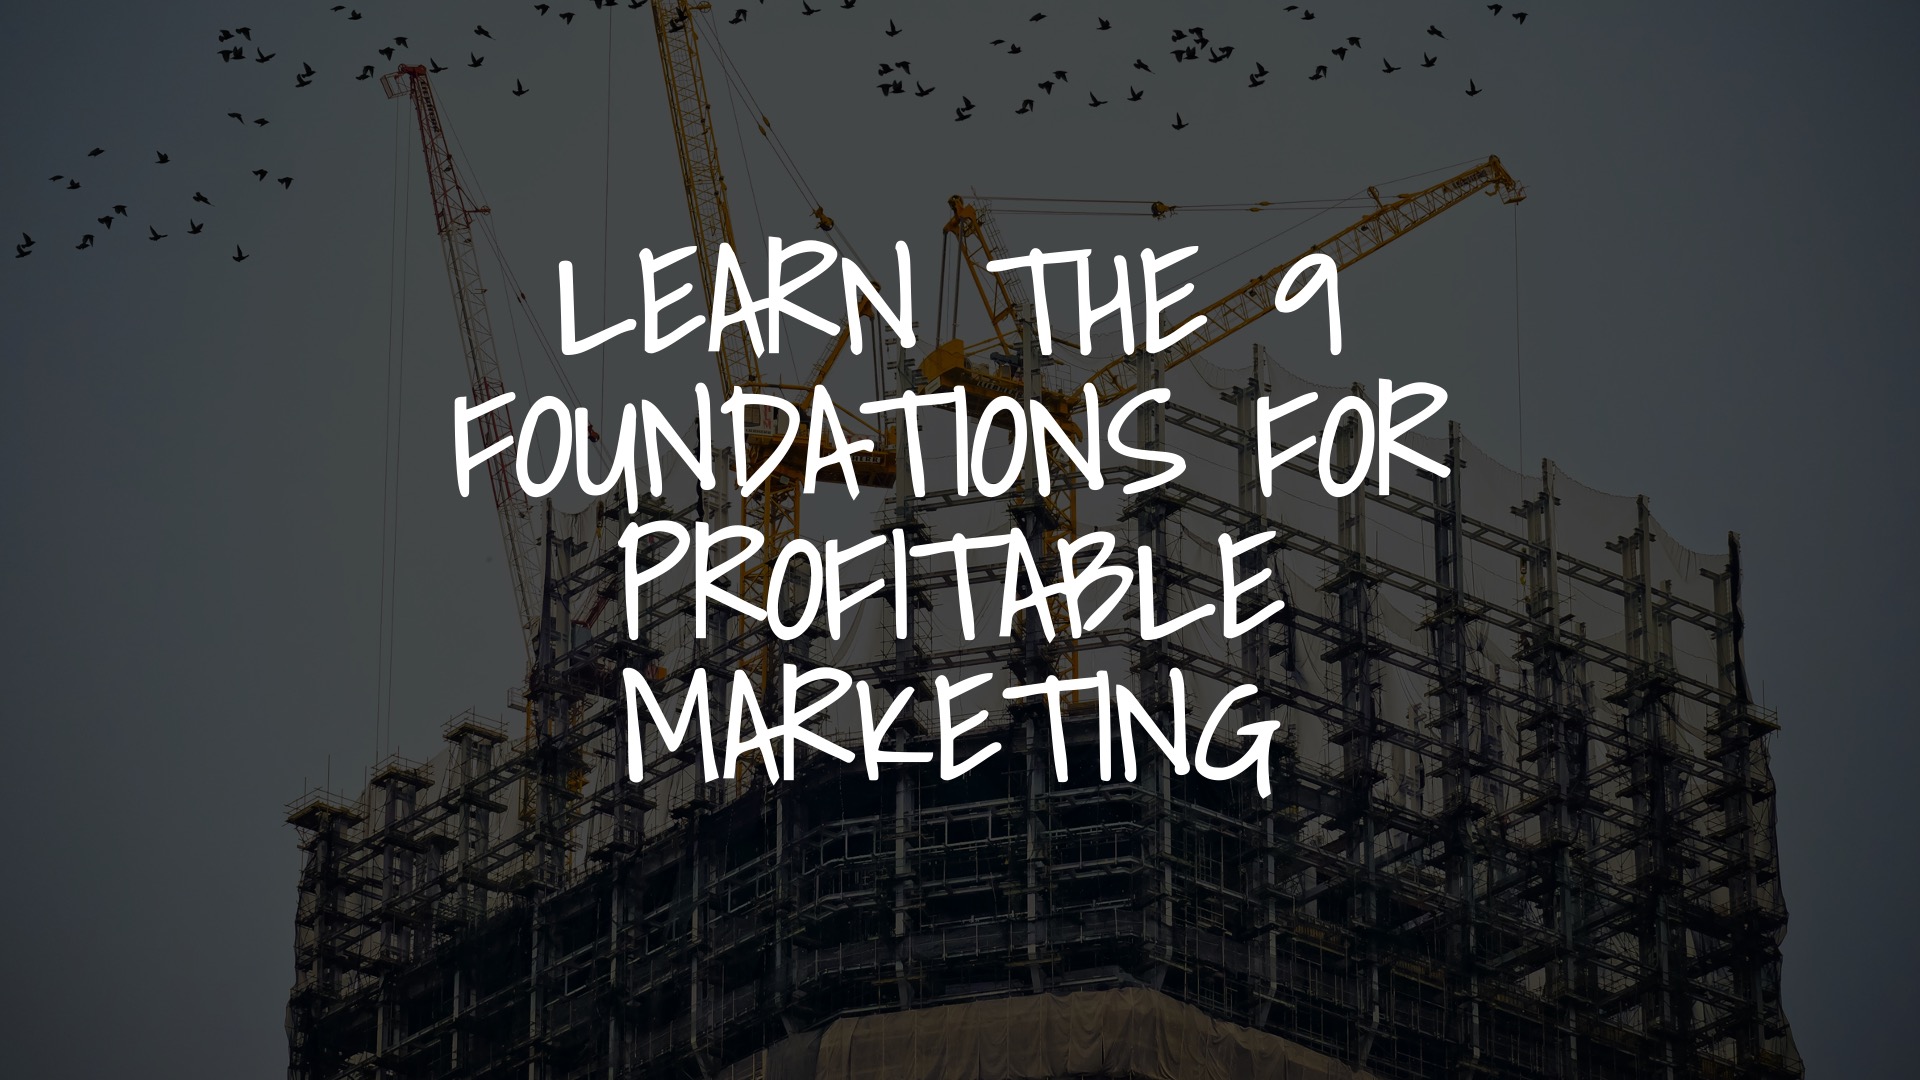 Learn The 9 Foundations Needed For Profitable Marketing